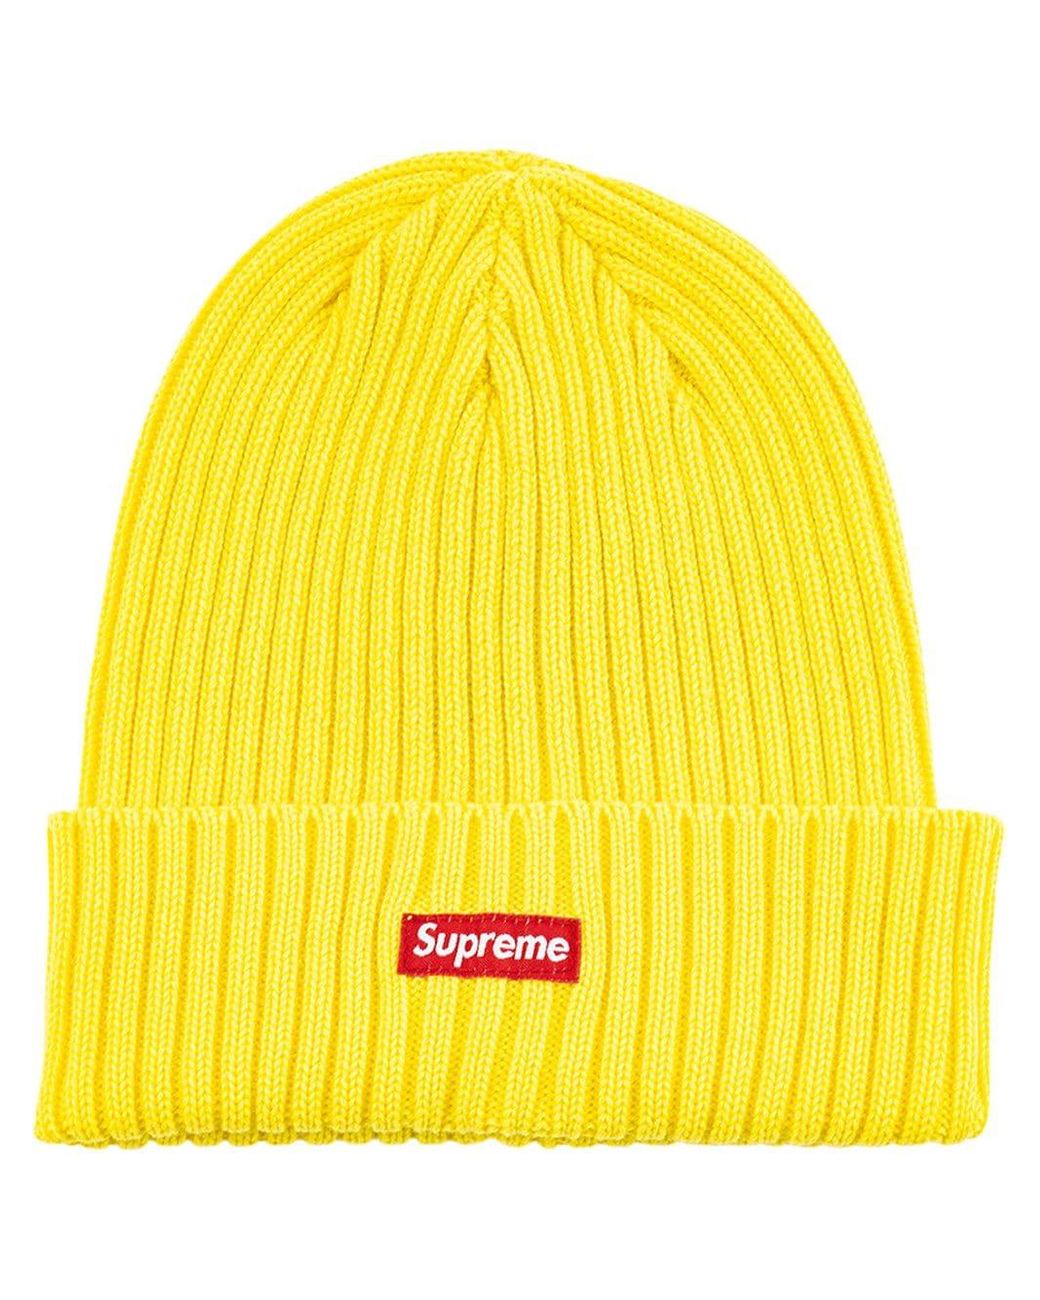 Supreme Overdyed Ribbed Knit Beanie in Yellow | Lyst